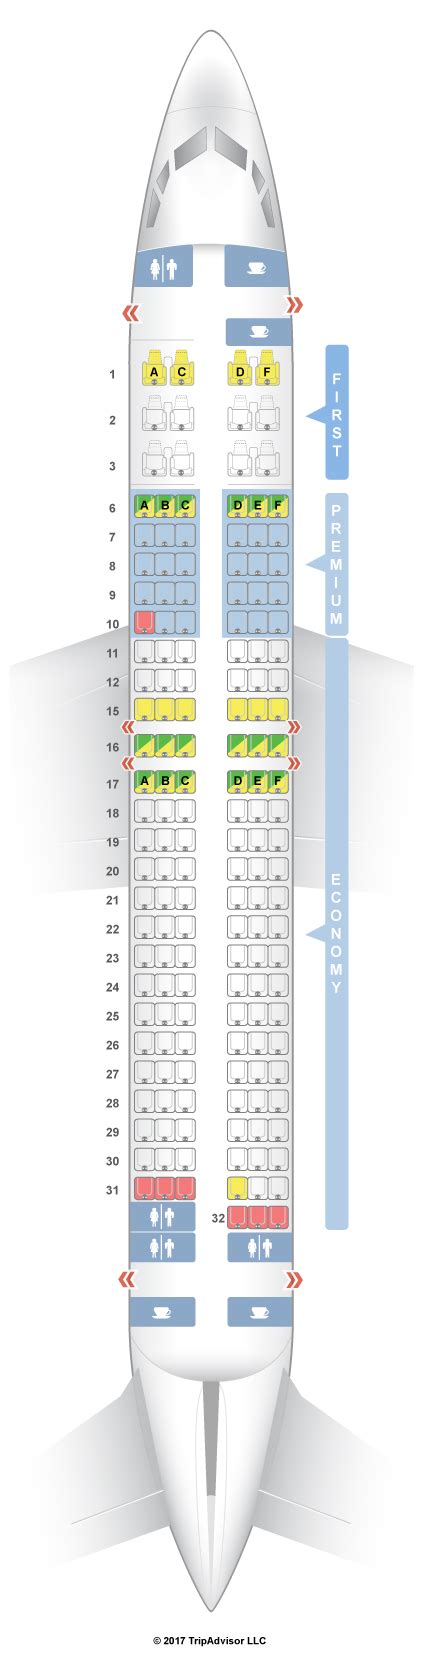 Alaska airlines seating chart. 60,000 Bonus Miles. Online-only offer. Offers vary elsewhere. Premium Class seating on Alaska Airlines features comfortable leather seats with more space and earlier boarding than Main Cabin seats, along with free cocktails, beer, and, wine. Upgrade yourself to Premium Class for your next flight. 